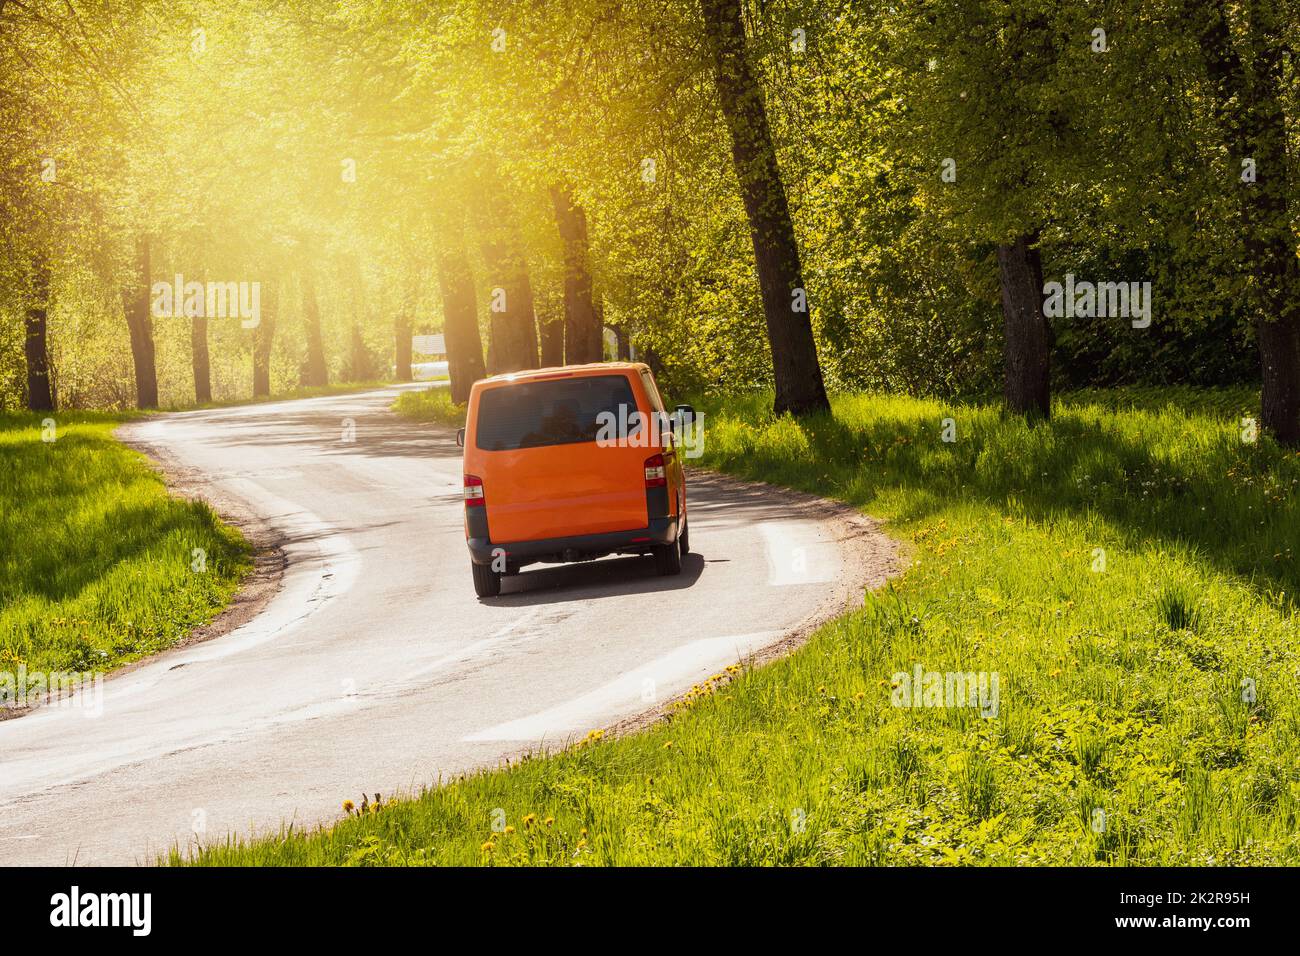 Car driving on the asphalt curvy road through the forest Stock Photo